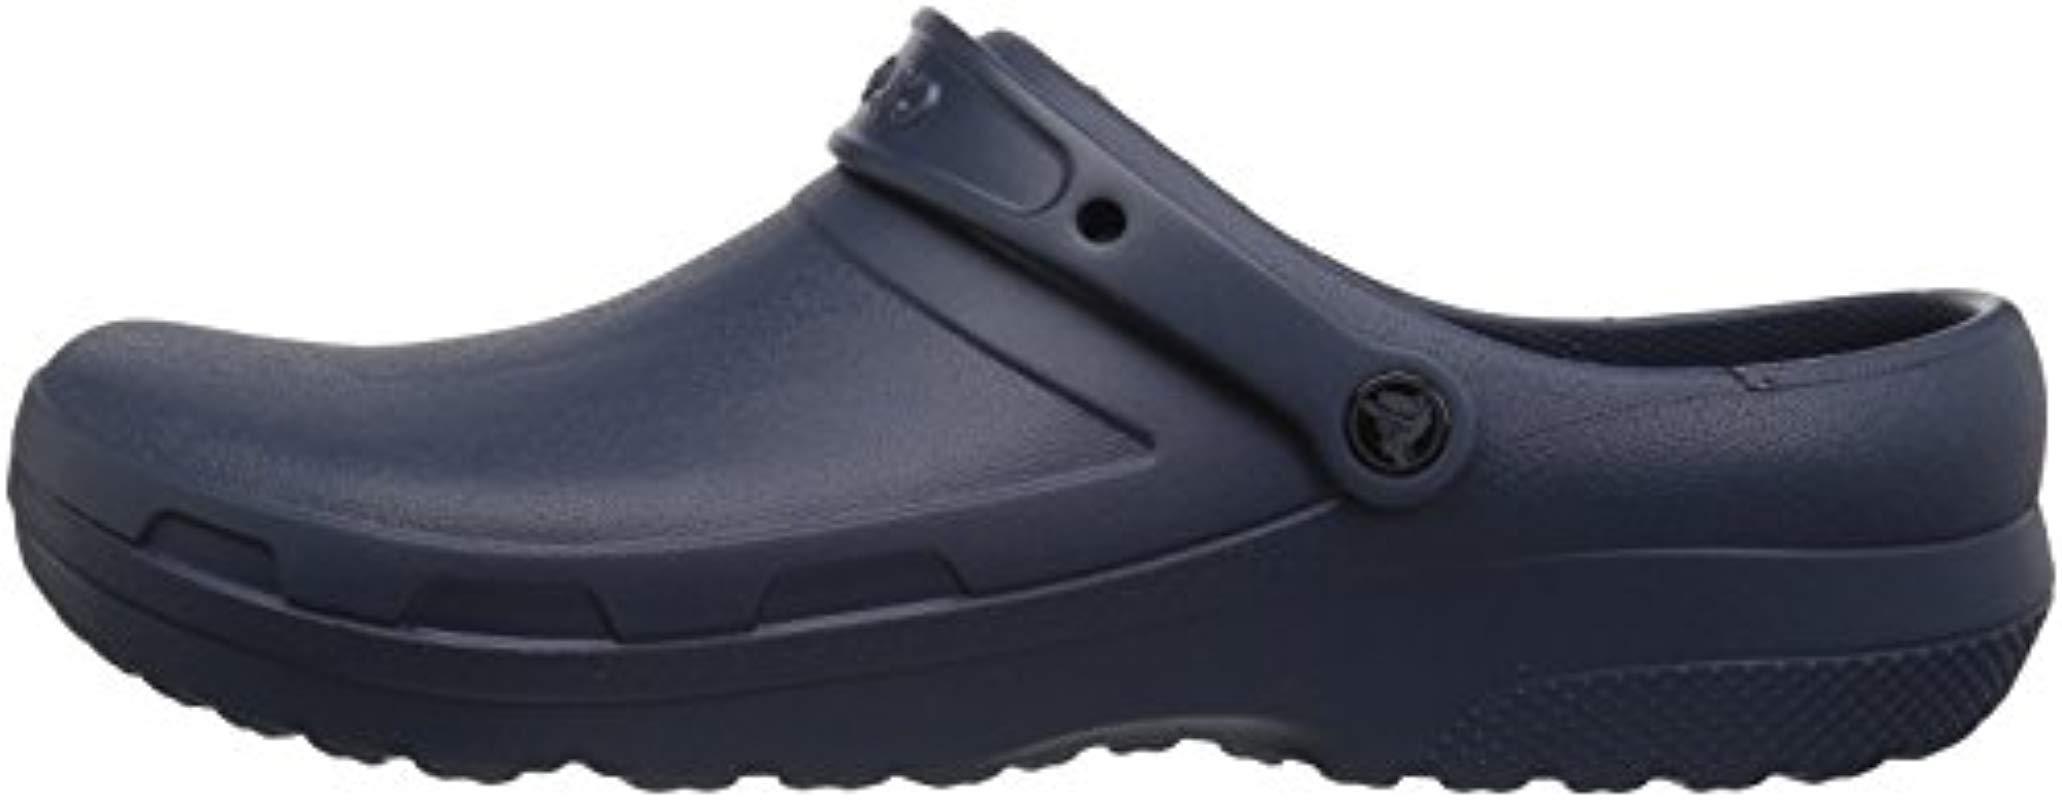 Crocs™ And Specialist Ii Clog in Navy (Blue) - Save 12% - Lyst